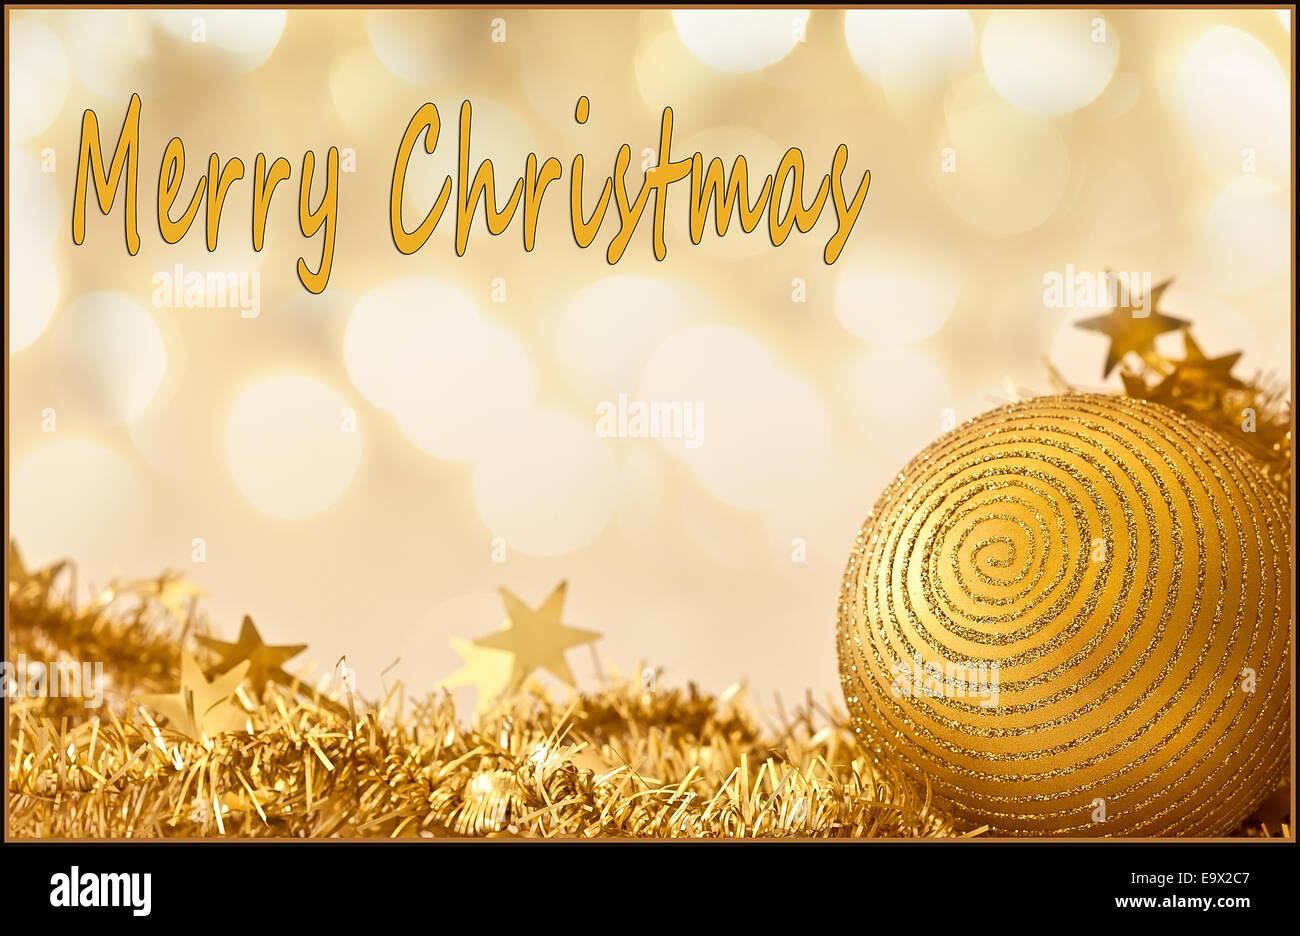 Merry Christmas Card with Gold, Glitter und text Stockfoto